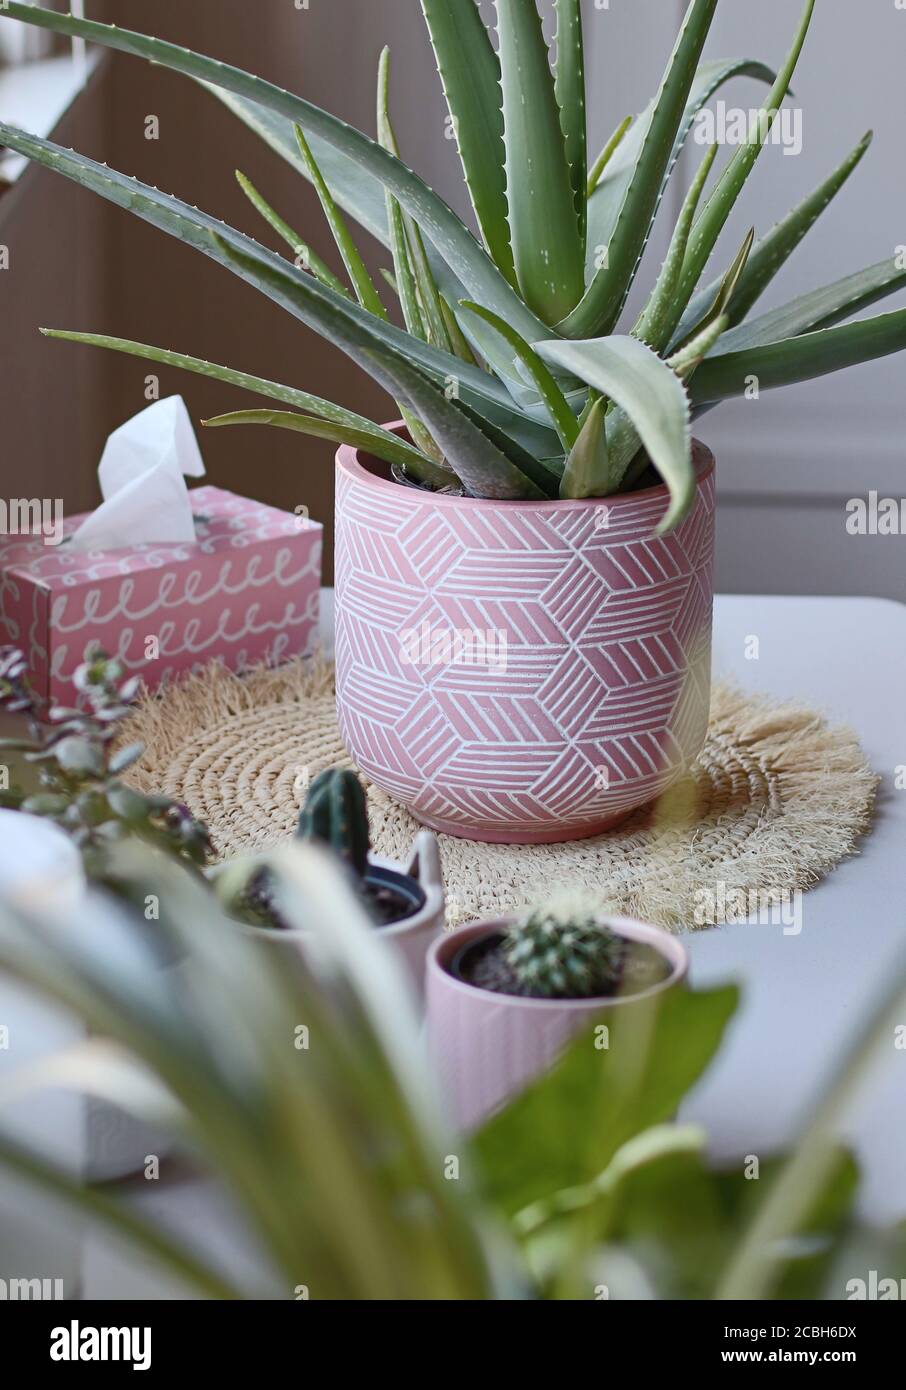 aloe vera plant in pink pot with small cactus plants Stock Photo